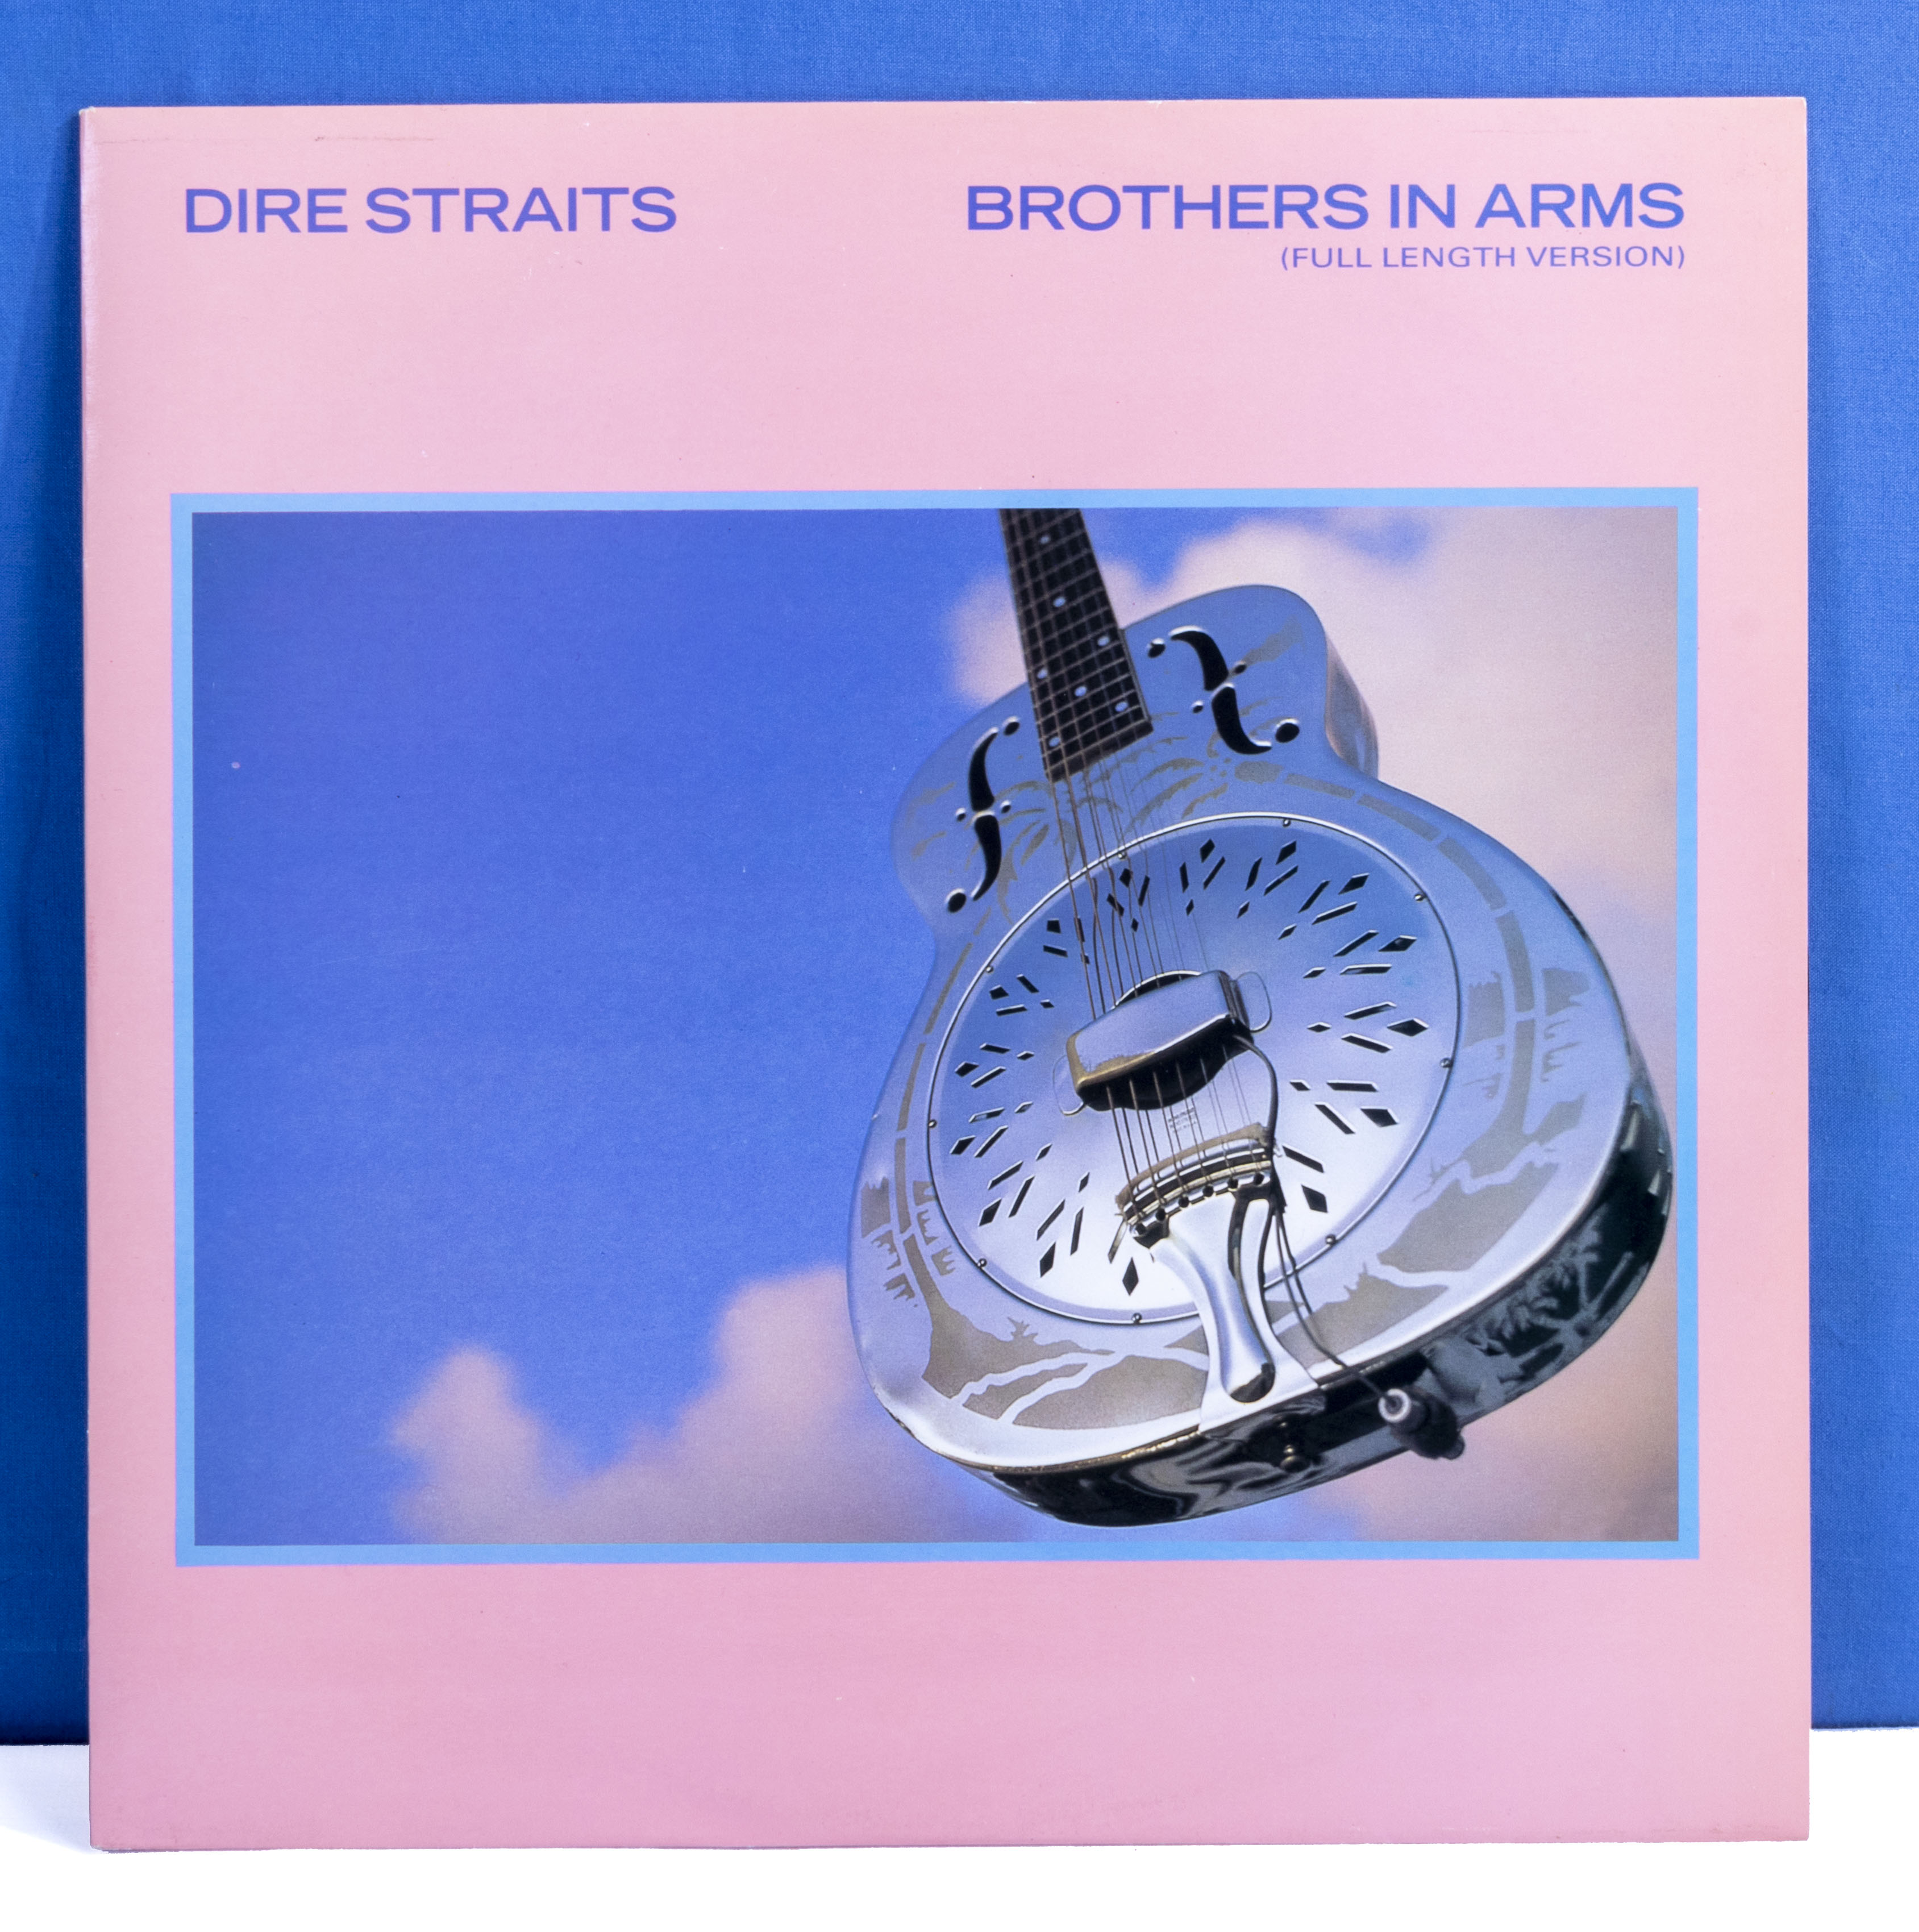 Dire Straits a copy of Brothers in Arms (Full length version) 12" single DSTR 1112, VG+ to near